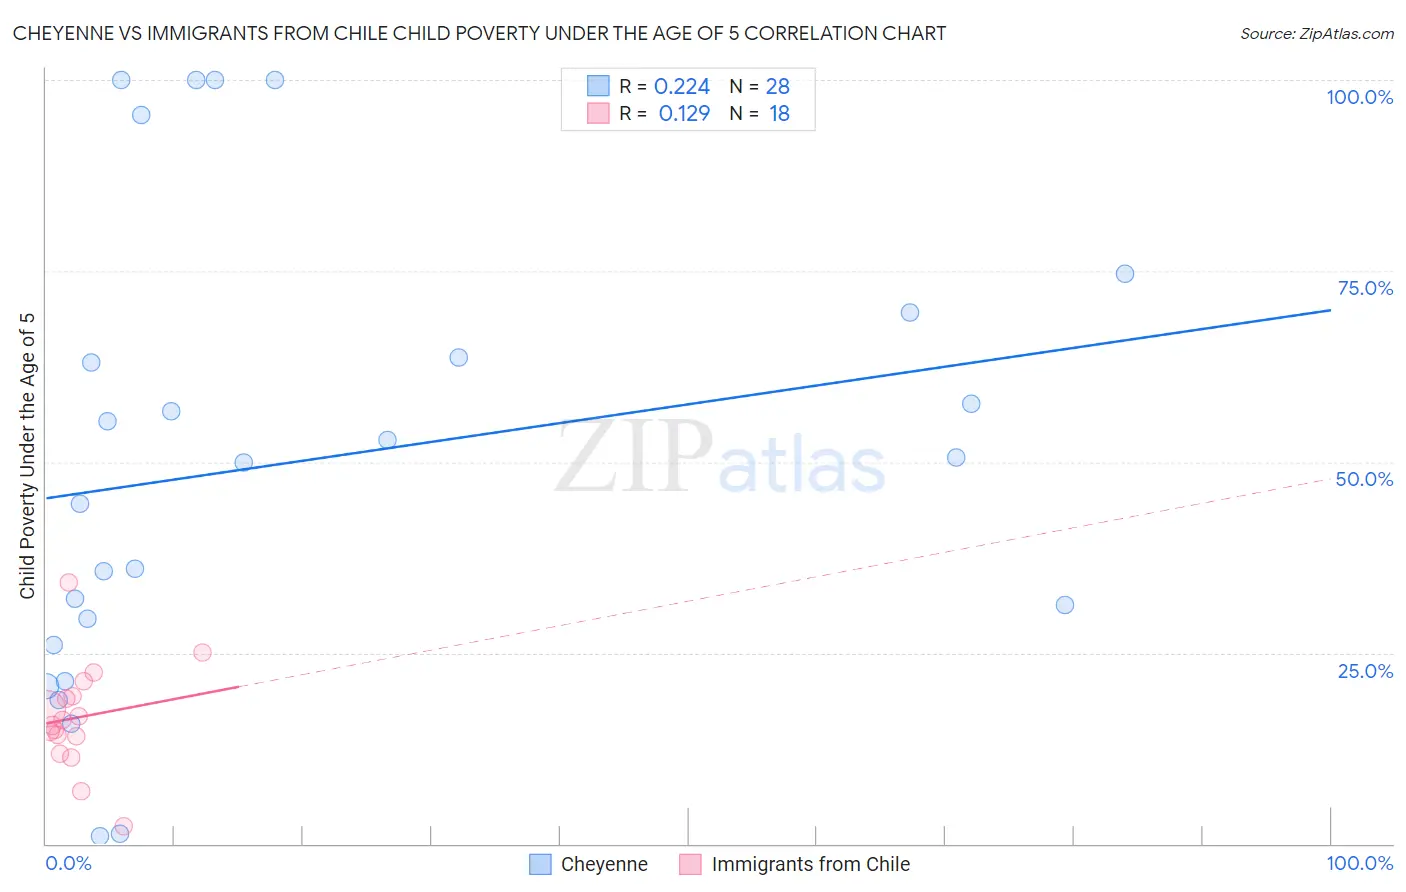 Cheyenne vs Immigrants from Chile Child Poverty Under the Age of 5